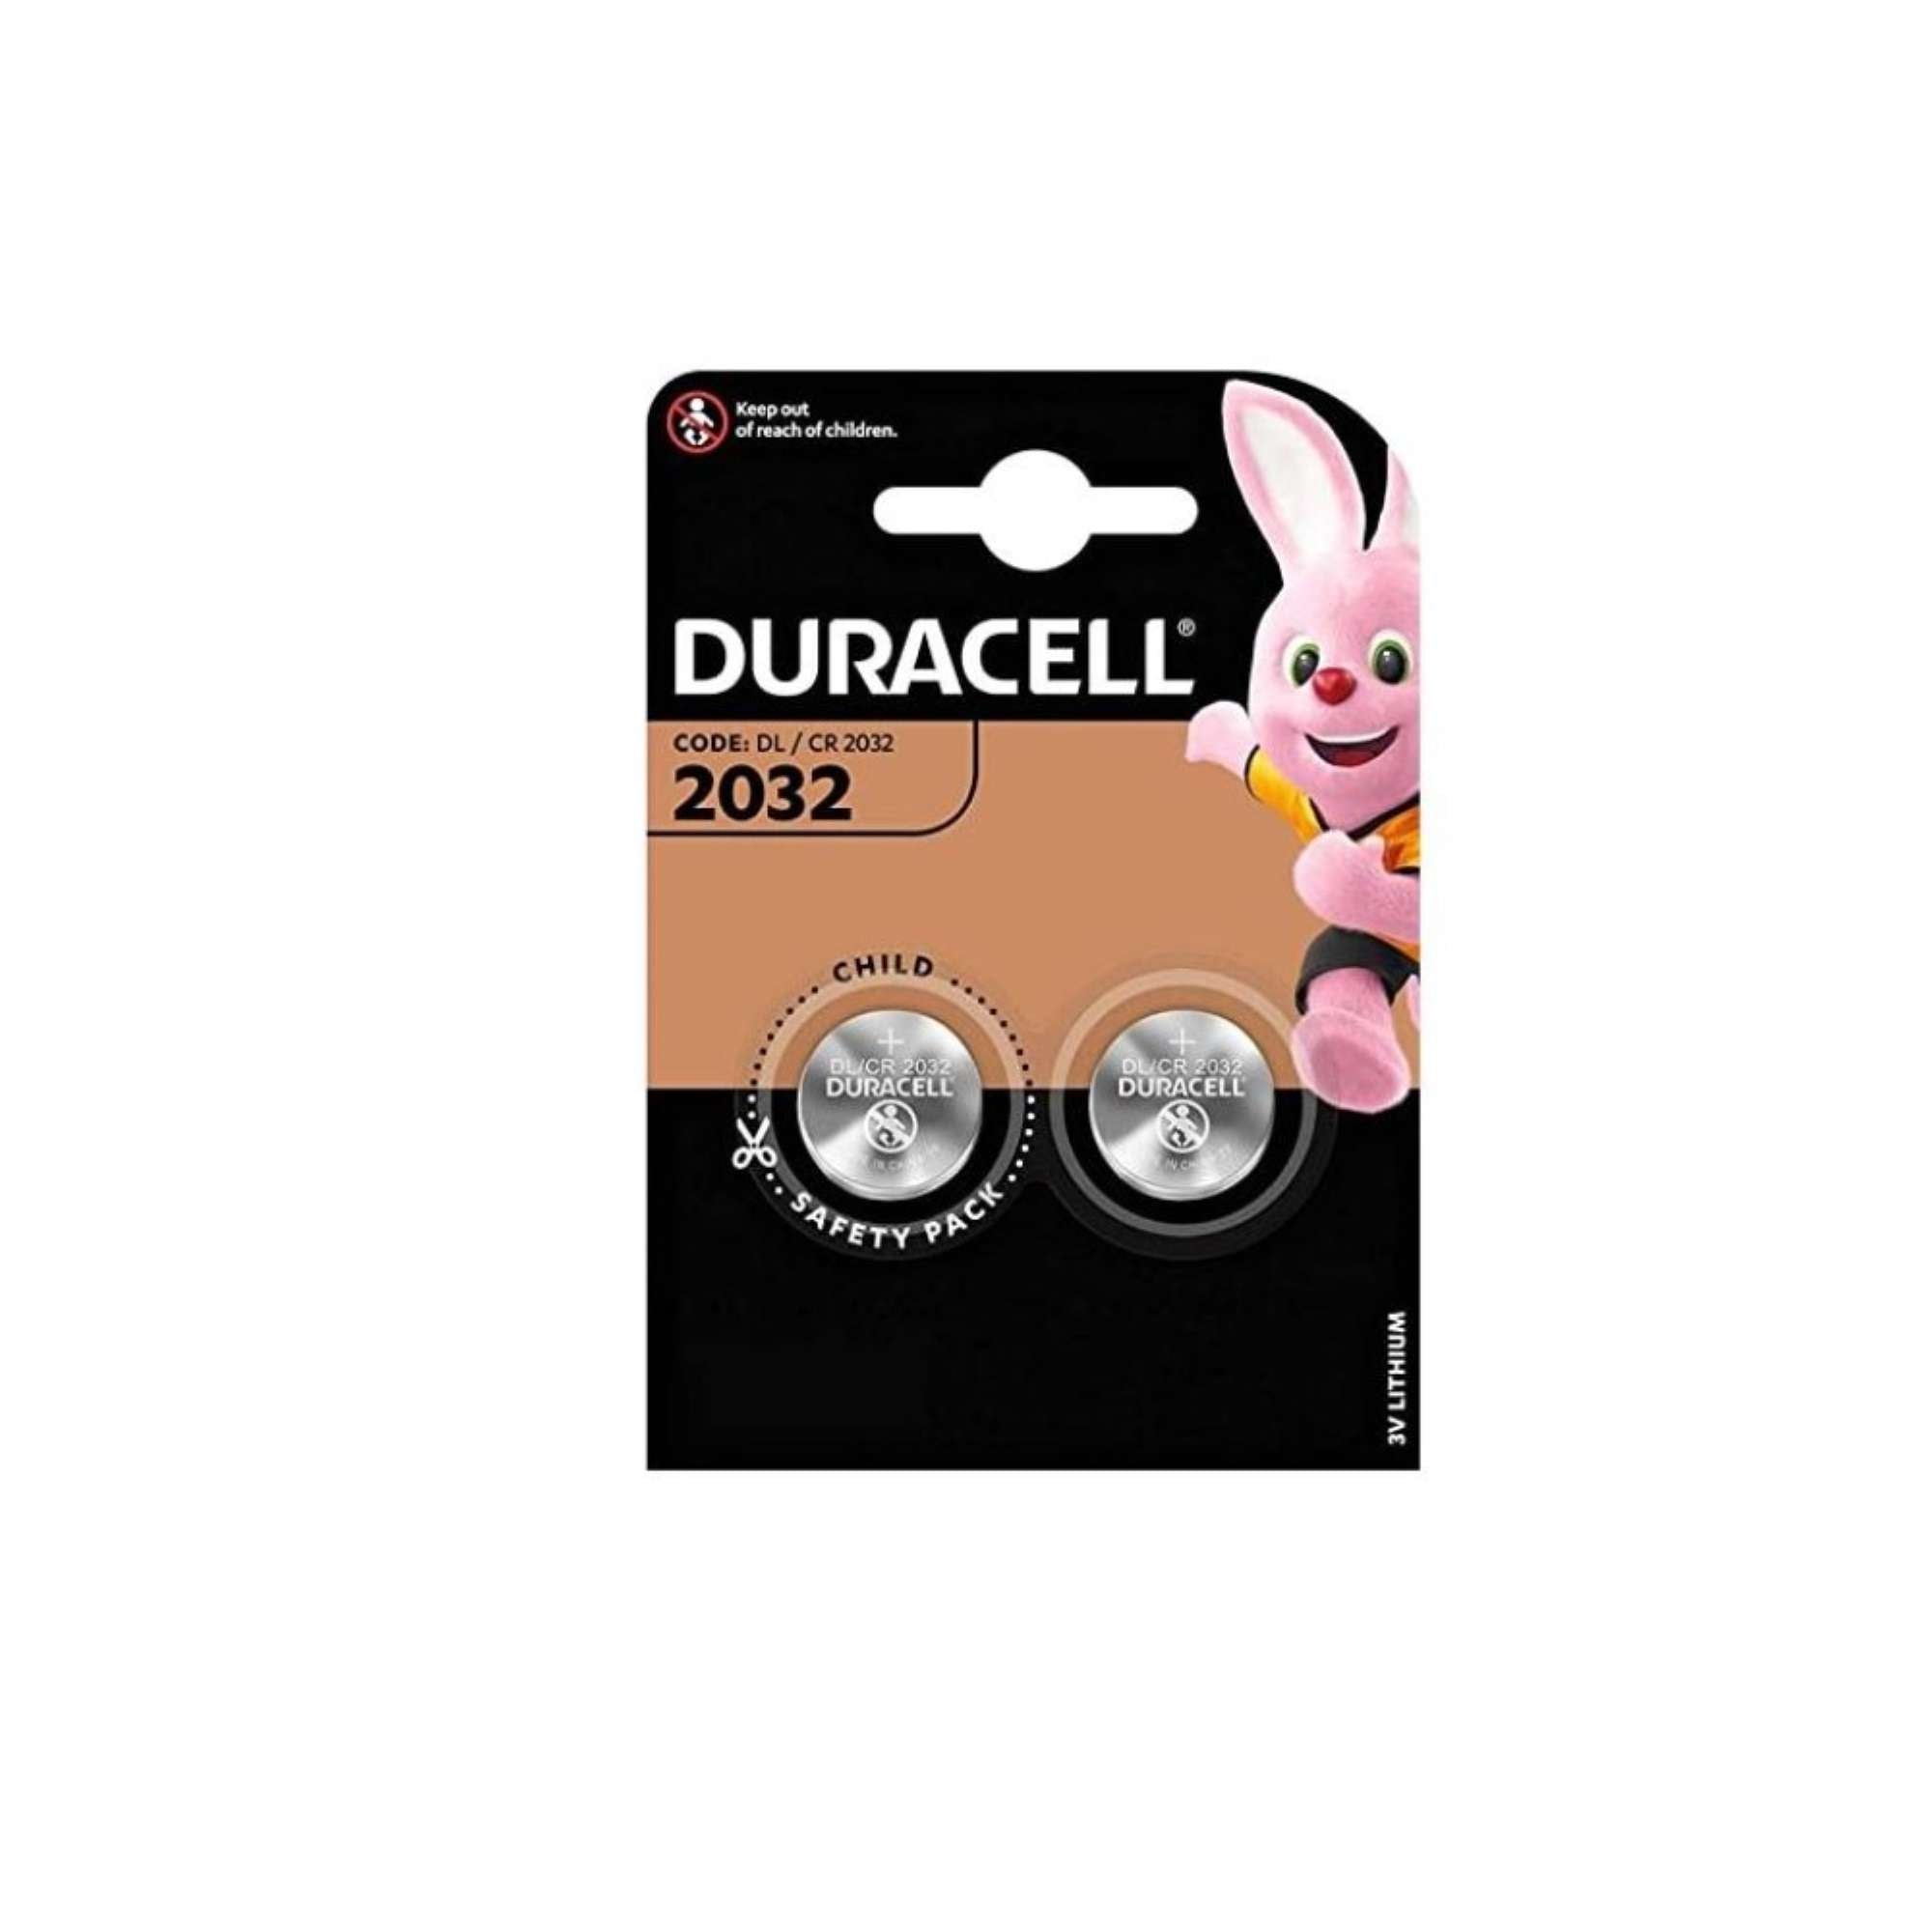 Batterie a bottone Specialist Electronic, blister con 2 pile - DURACELL 2032